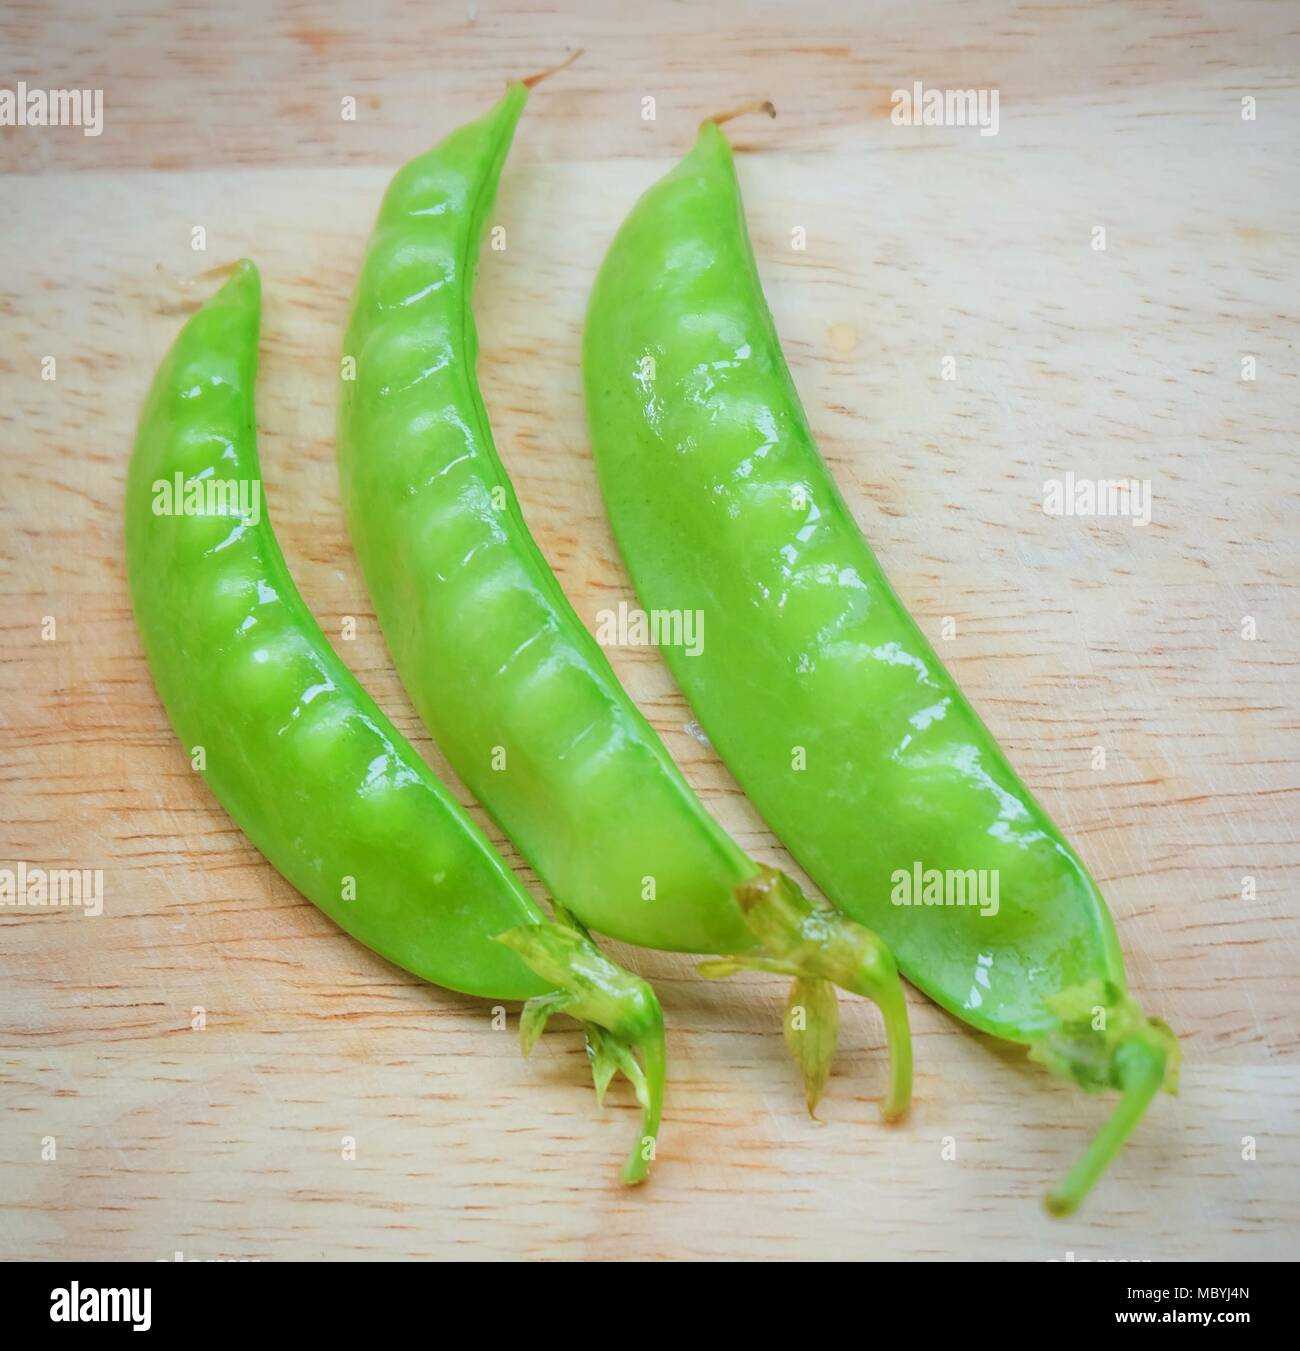 Vegetable, Fresh Green Peas Pods on Cutting Board, High in Vitamin K, B, C and A. Stock Photo